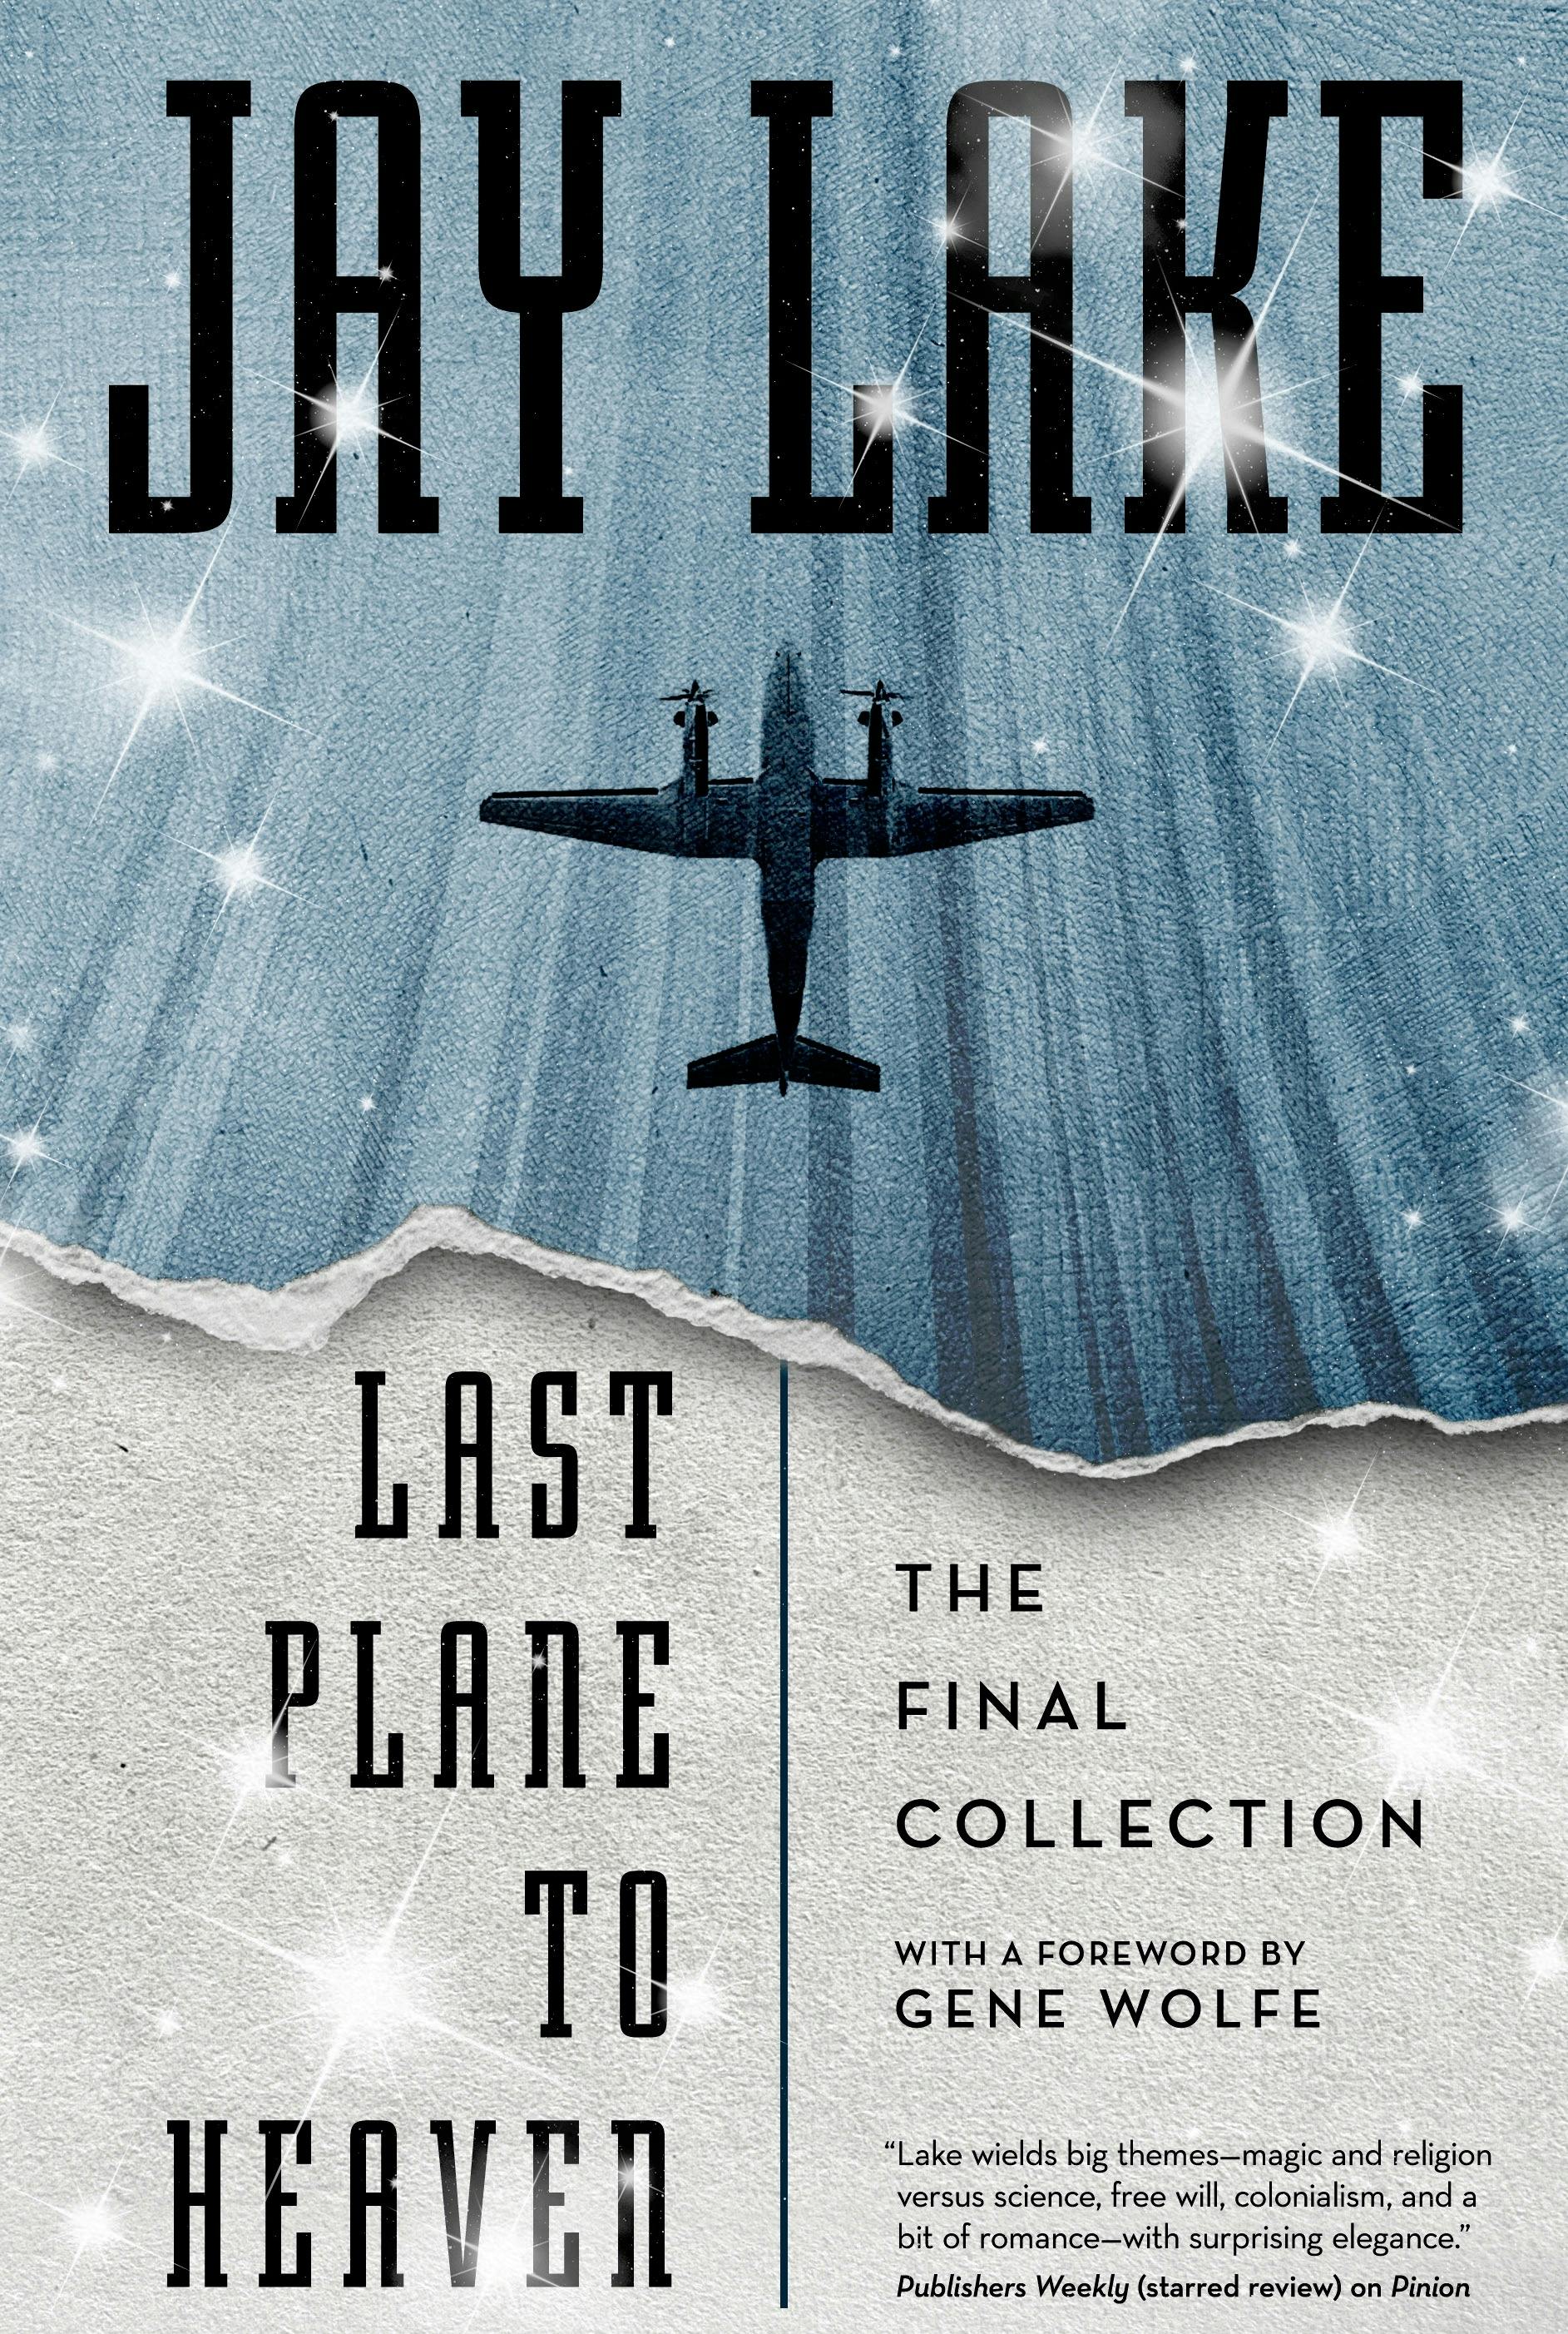 Cover for the book titled as: Last Plane to Heaven